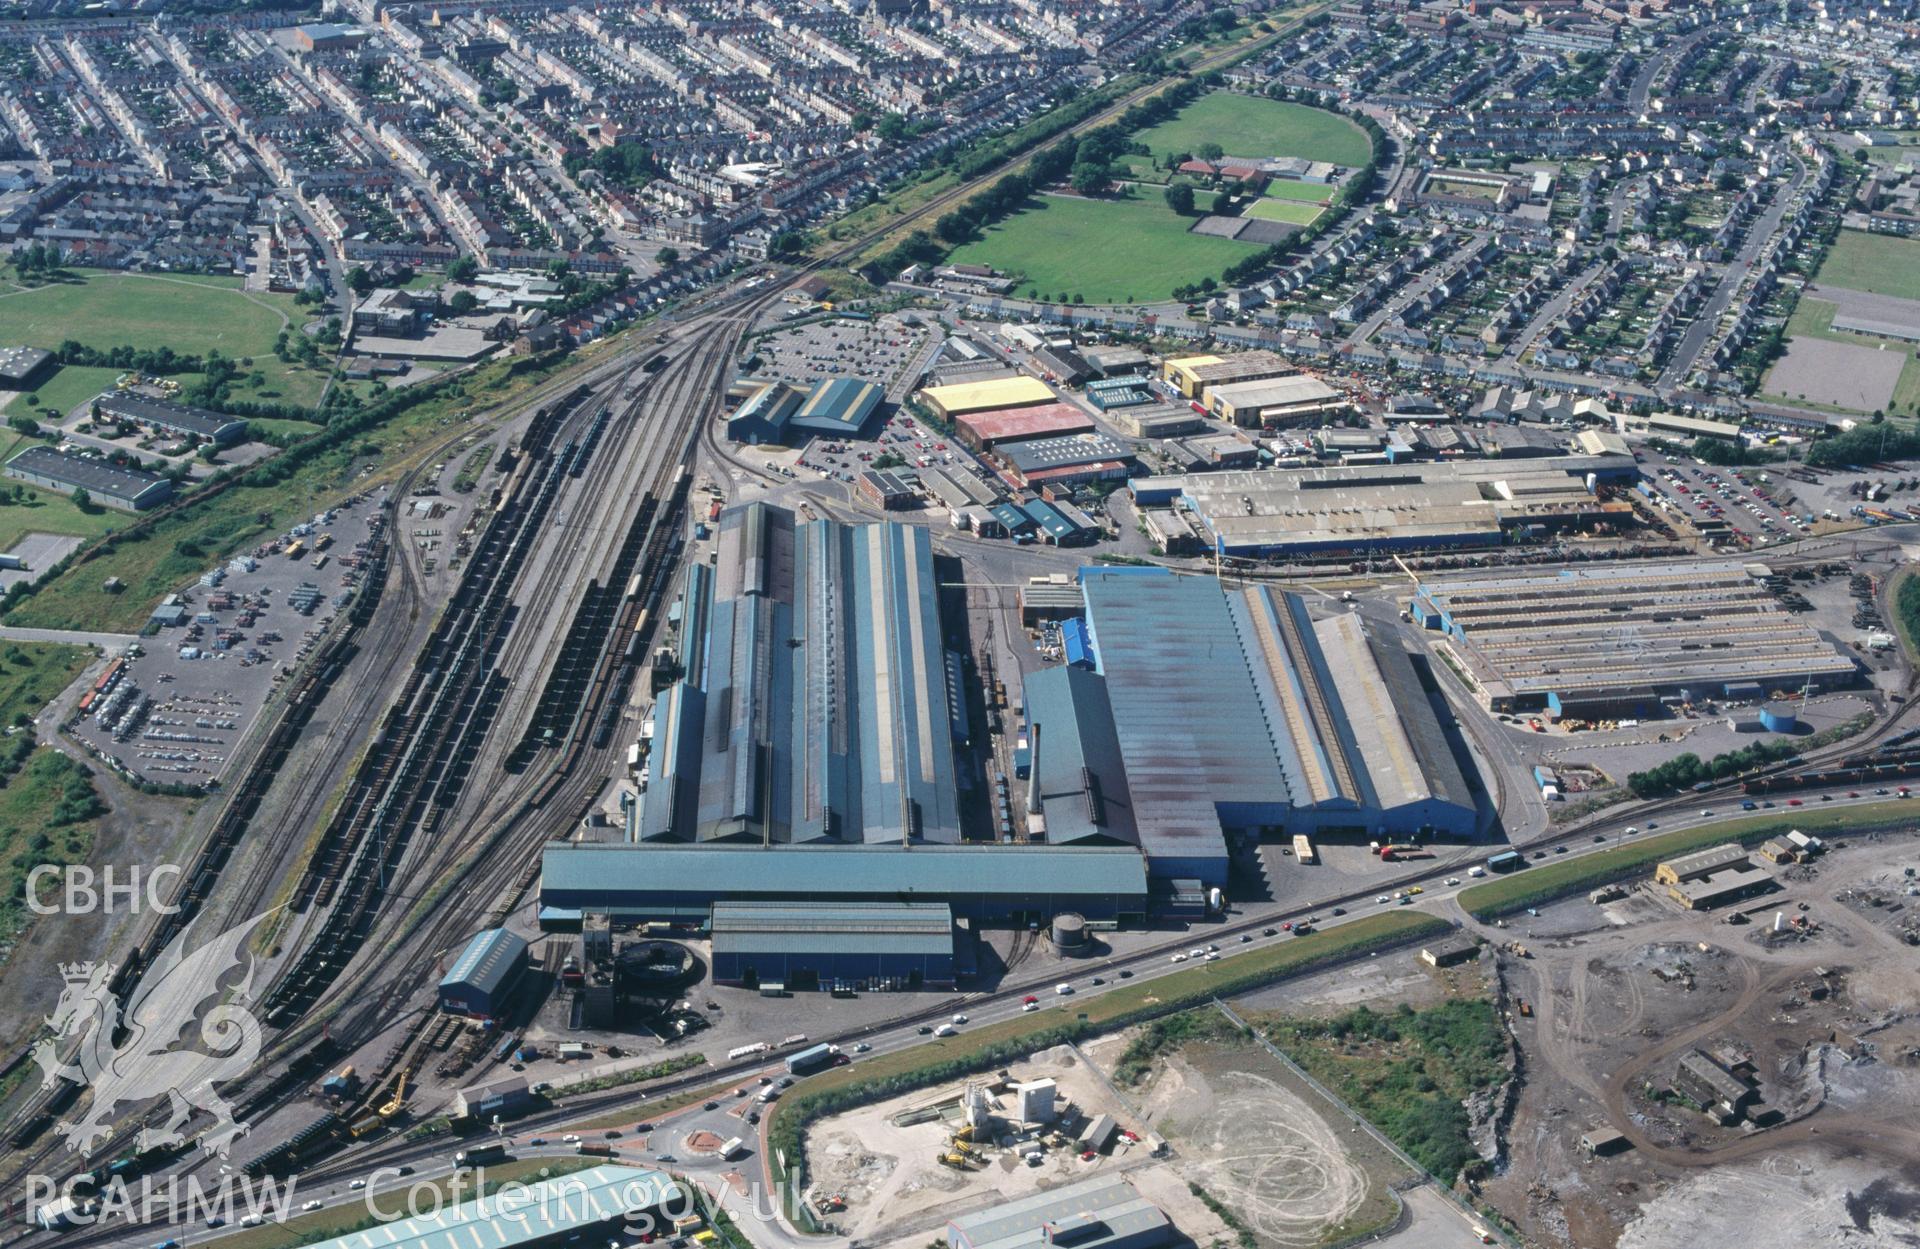 RCAHMW colour oblique aerial photograph of East Moors Steelworks, Cardiff taken on 20/07/1995 by C.R. Musson